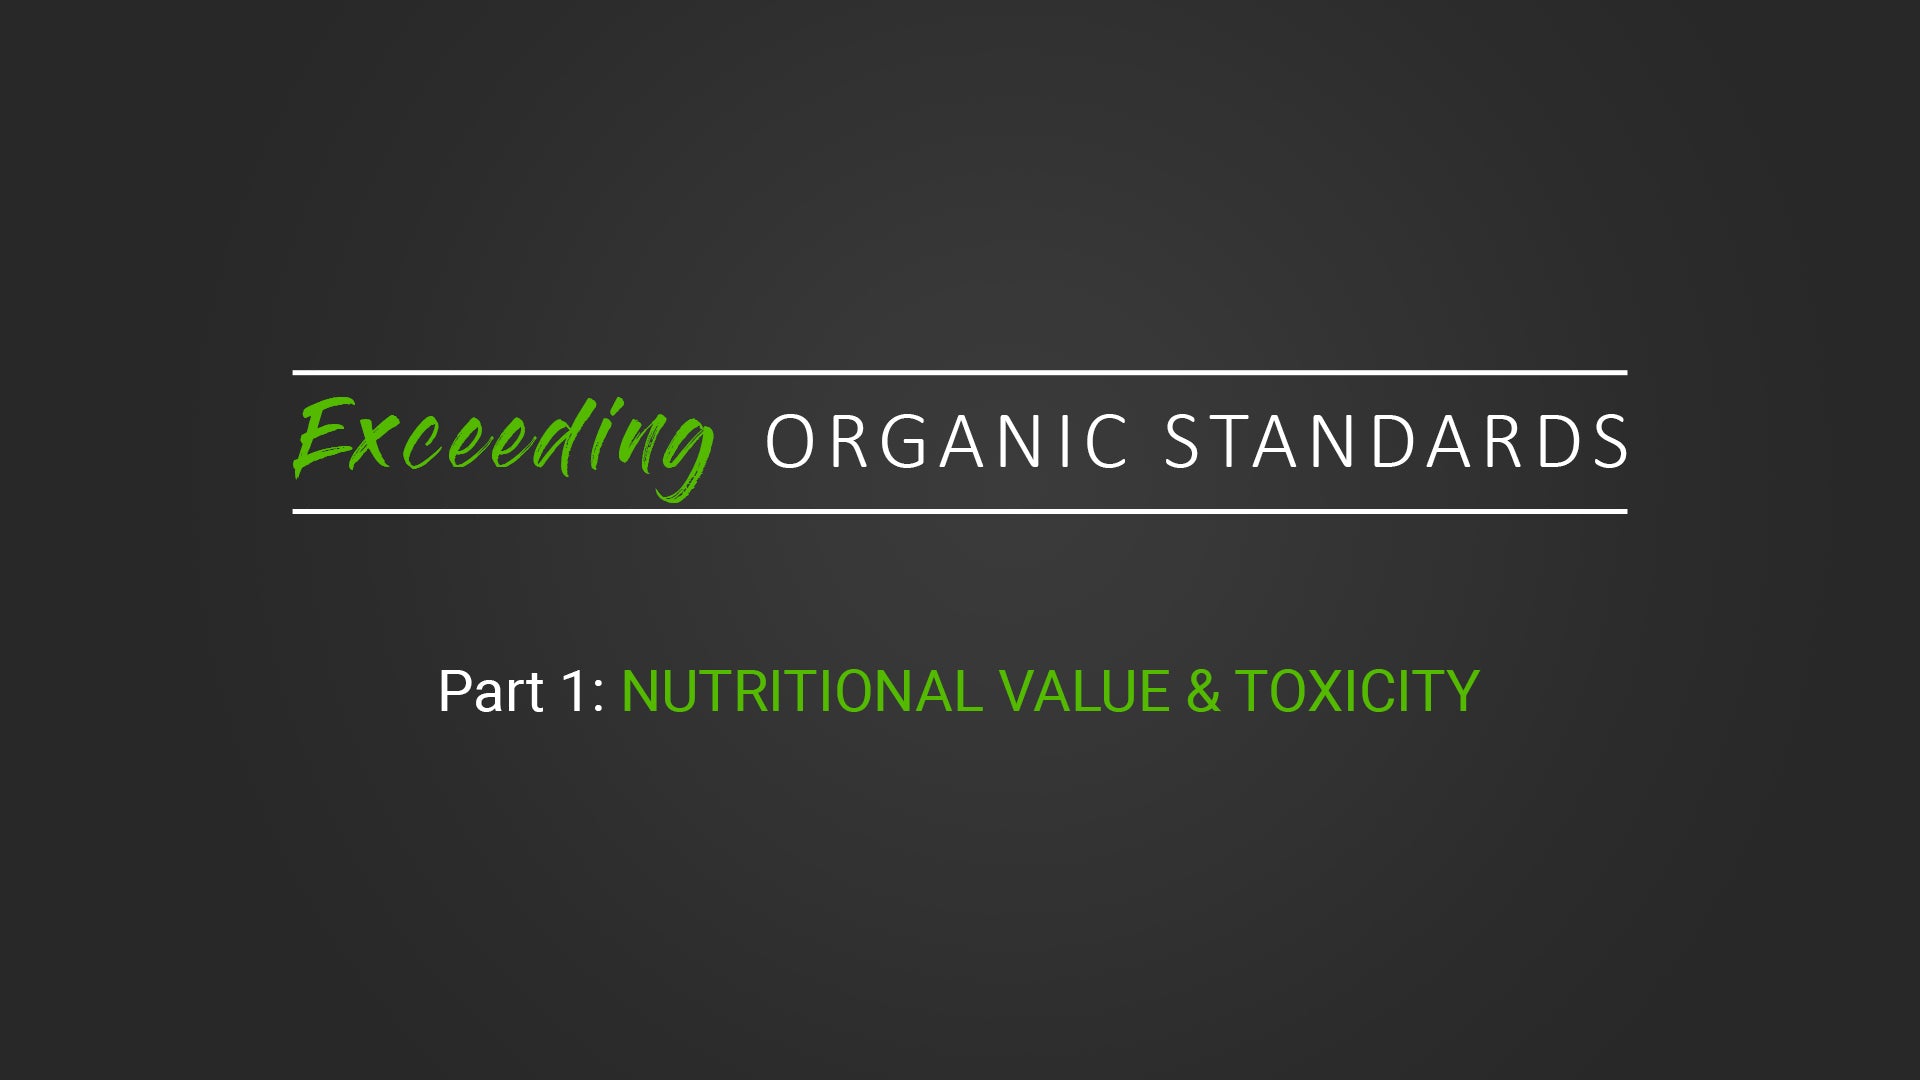 Exceeding Organic Standards: Part 1 Nutrition & Toxicity